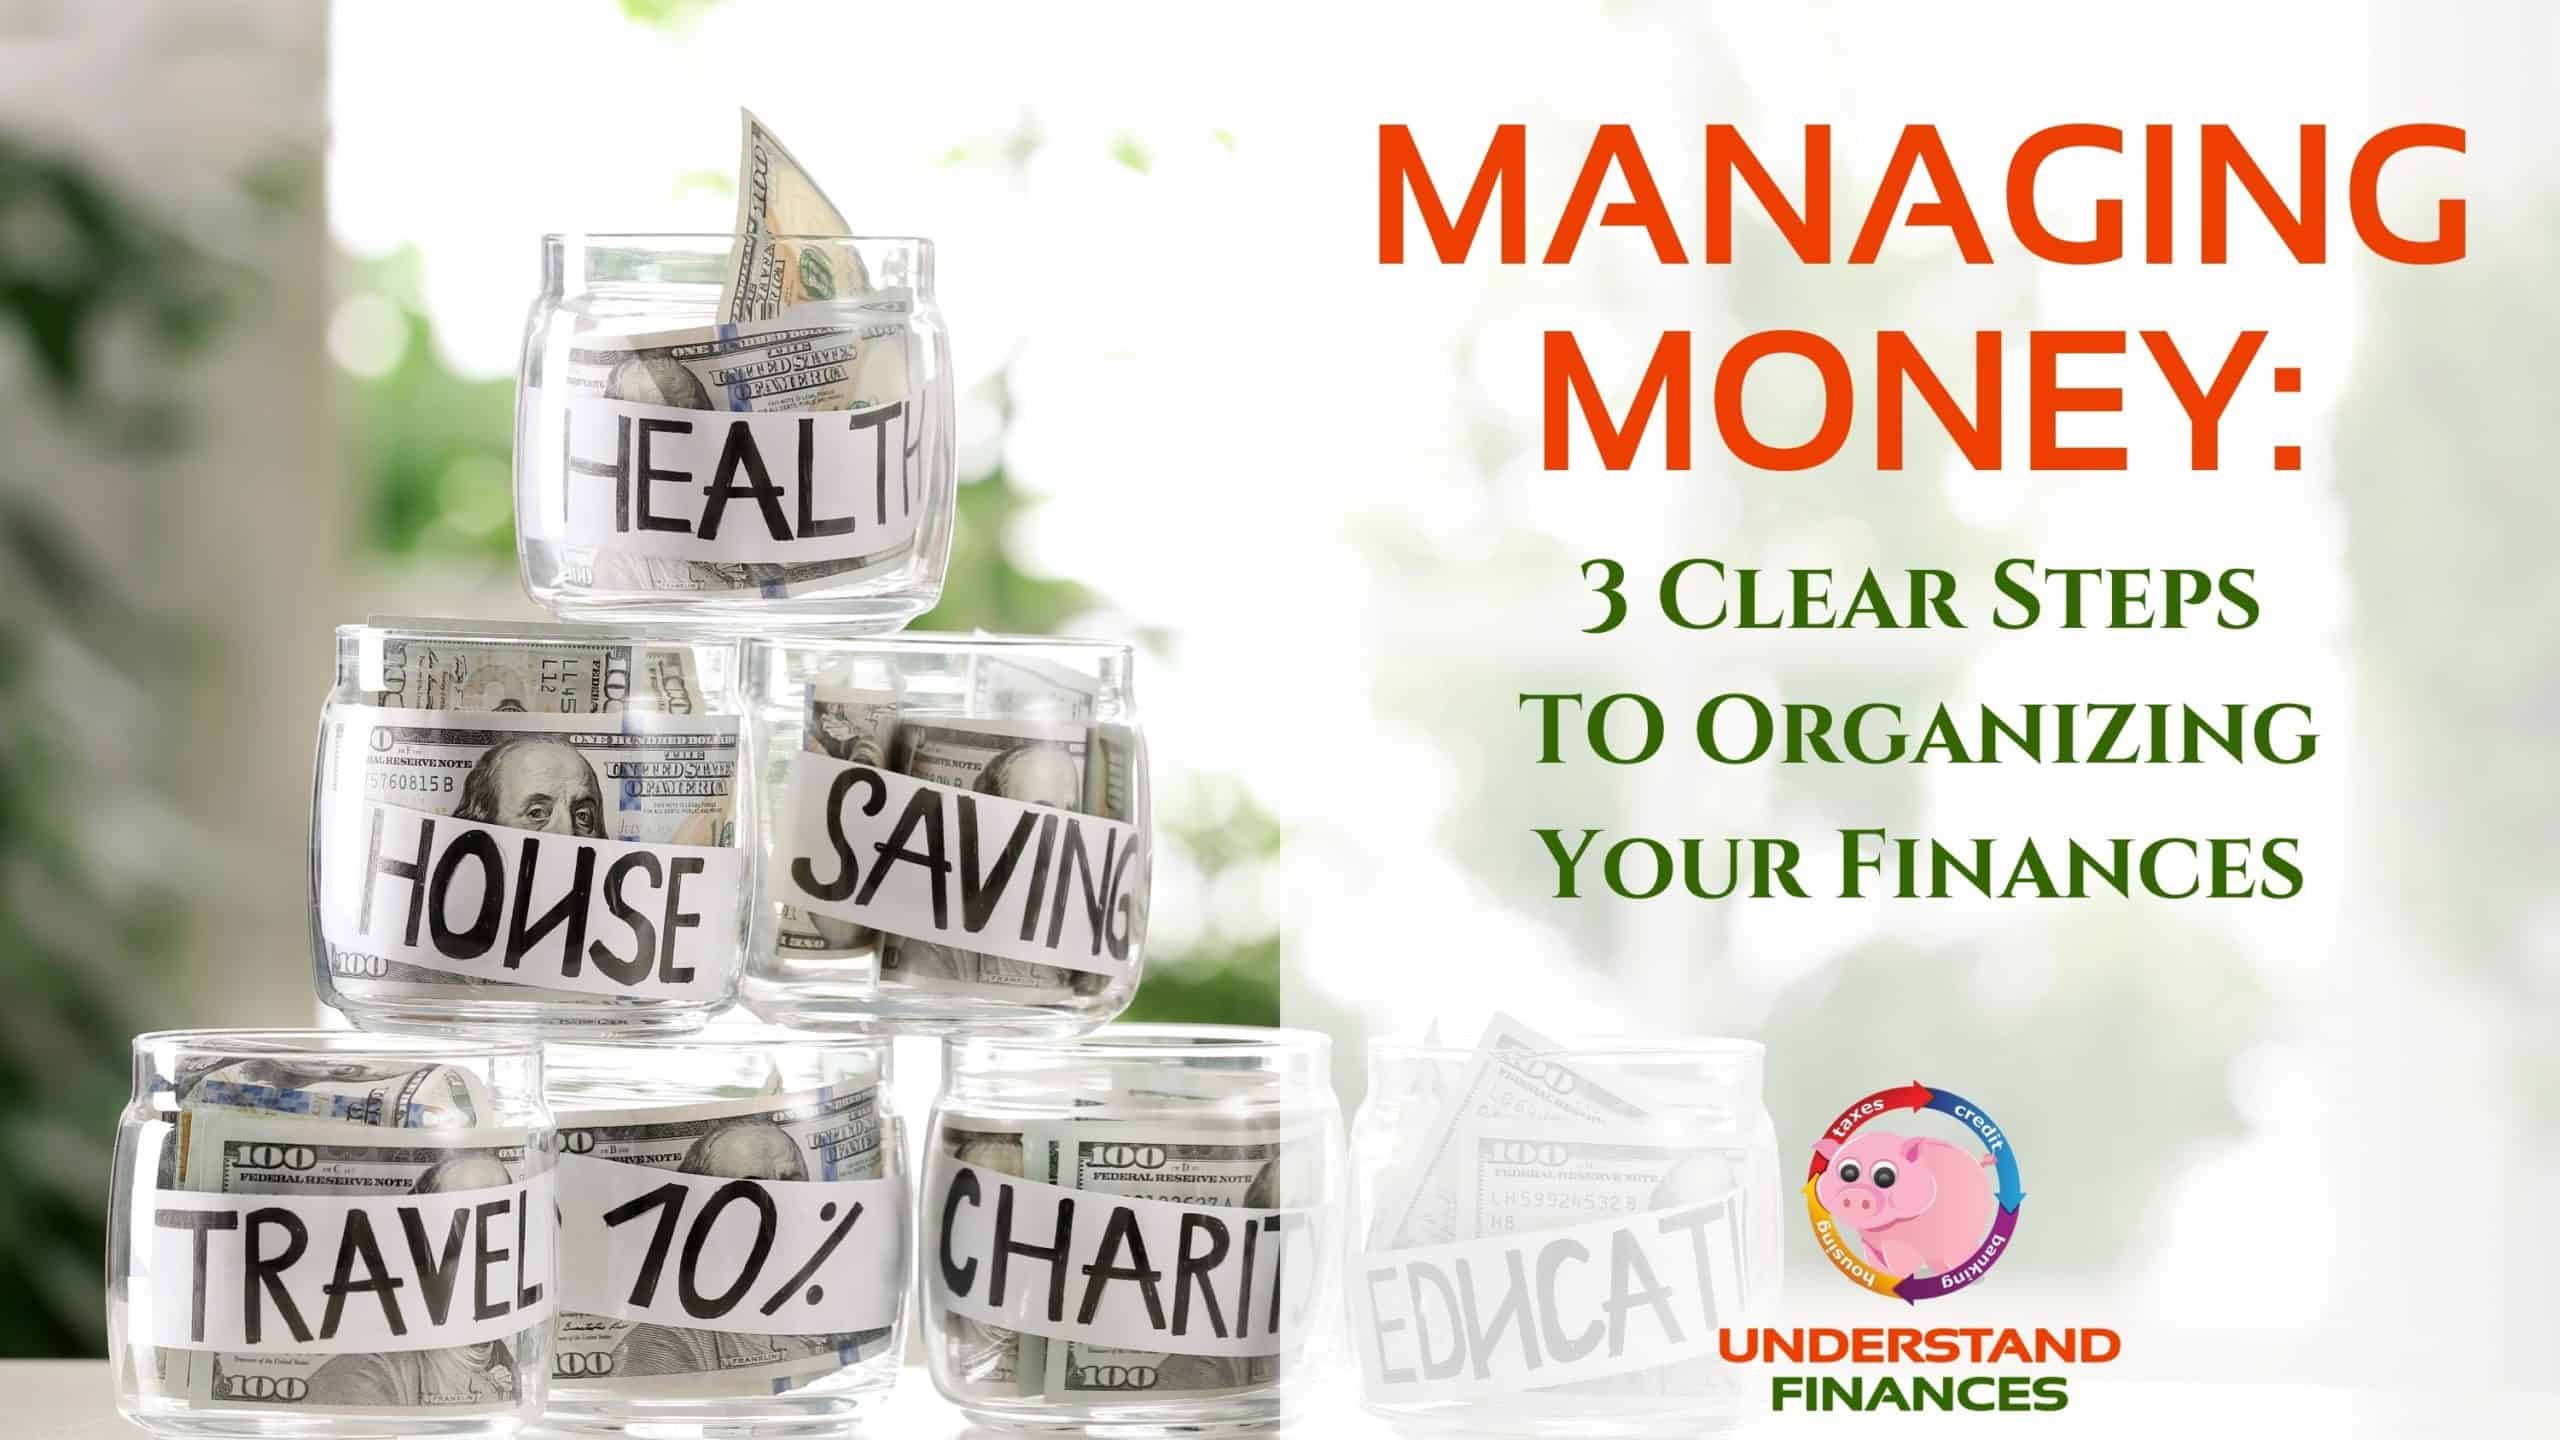 $100 bills stuffed into glass jars labeled health, house, saving, travel, charity and education for money management purposes